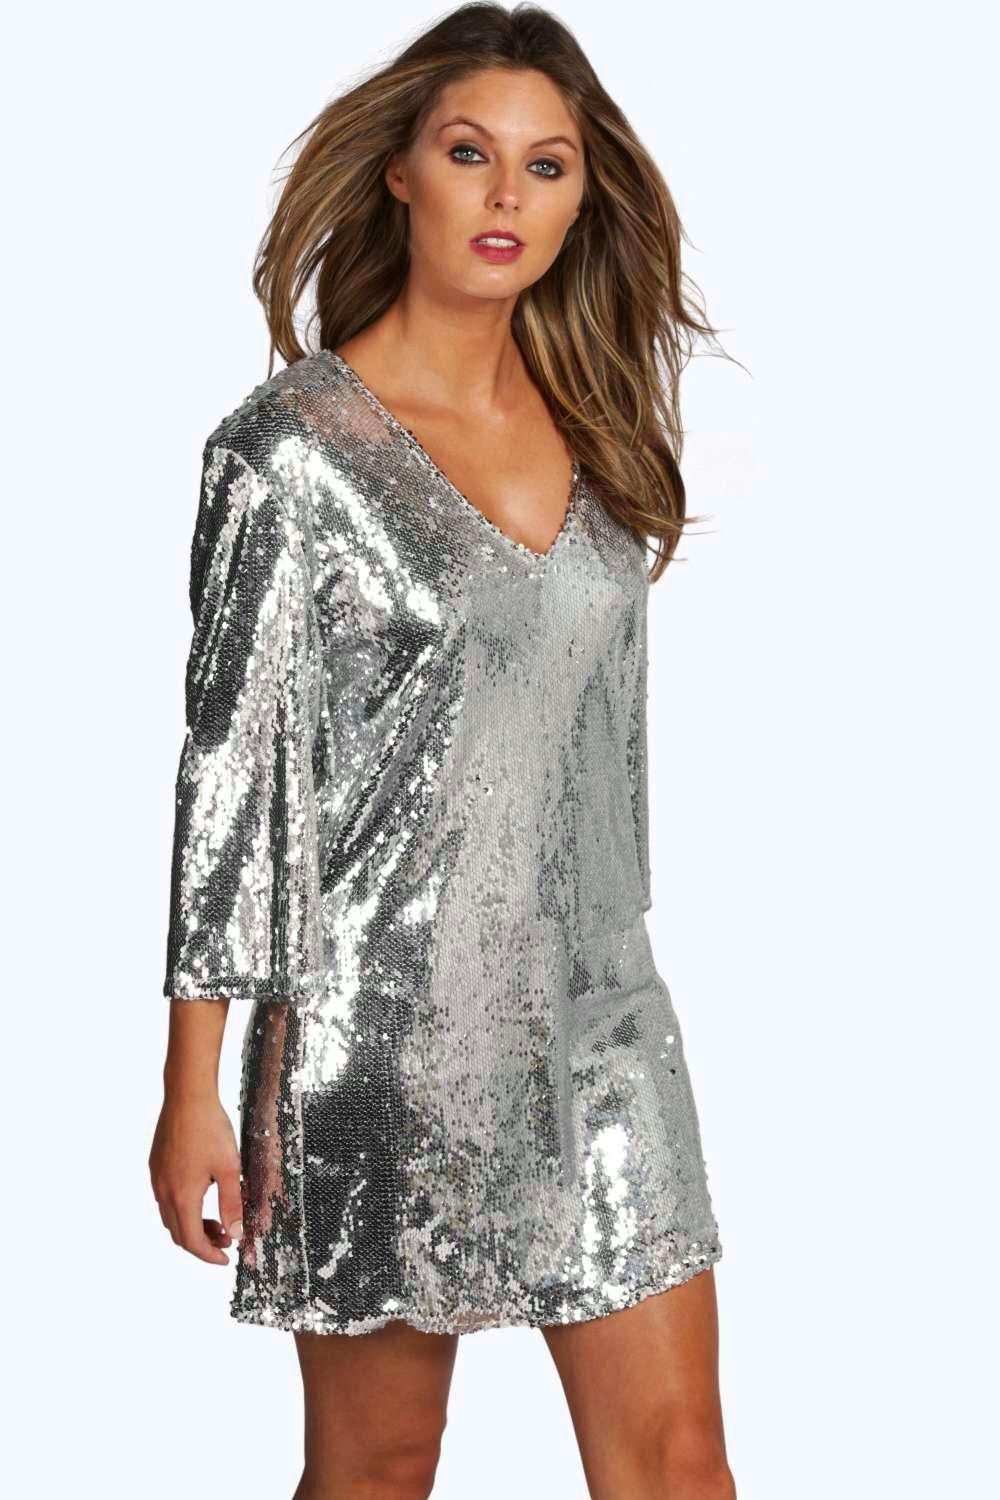 Boohoo Womens Boutique Persie All Over Sequin Shift Dress | eBay